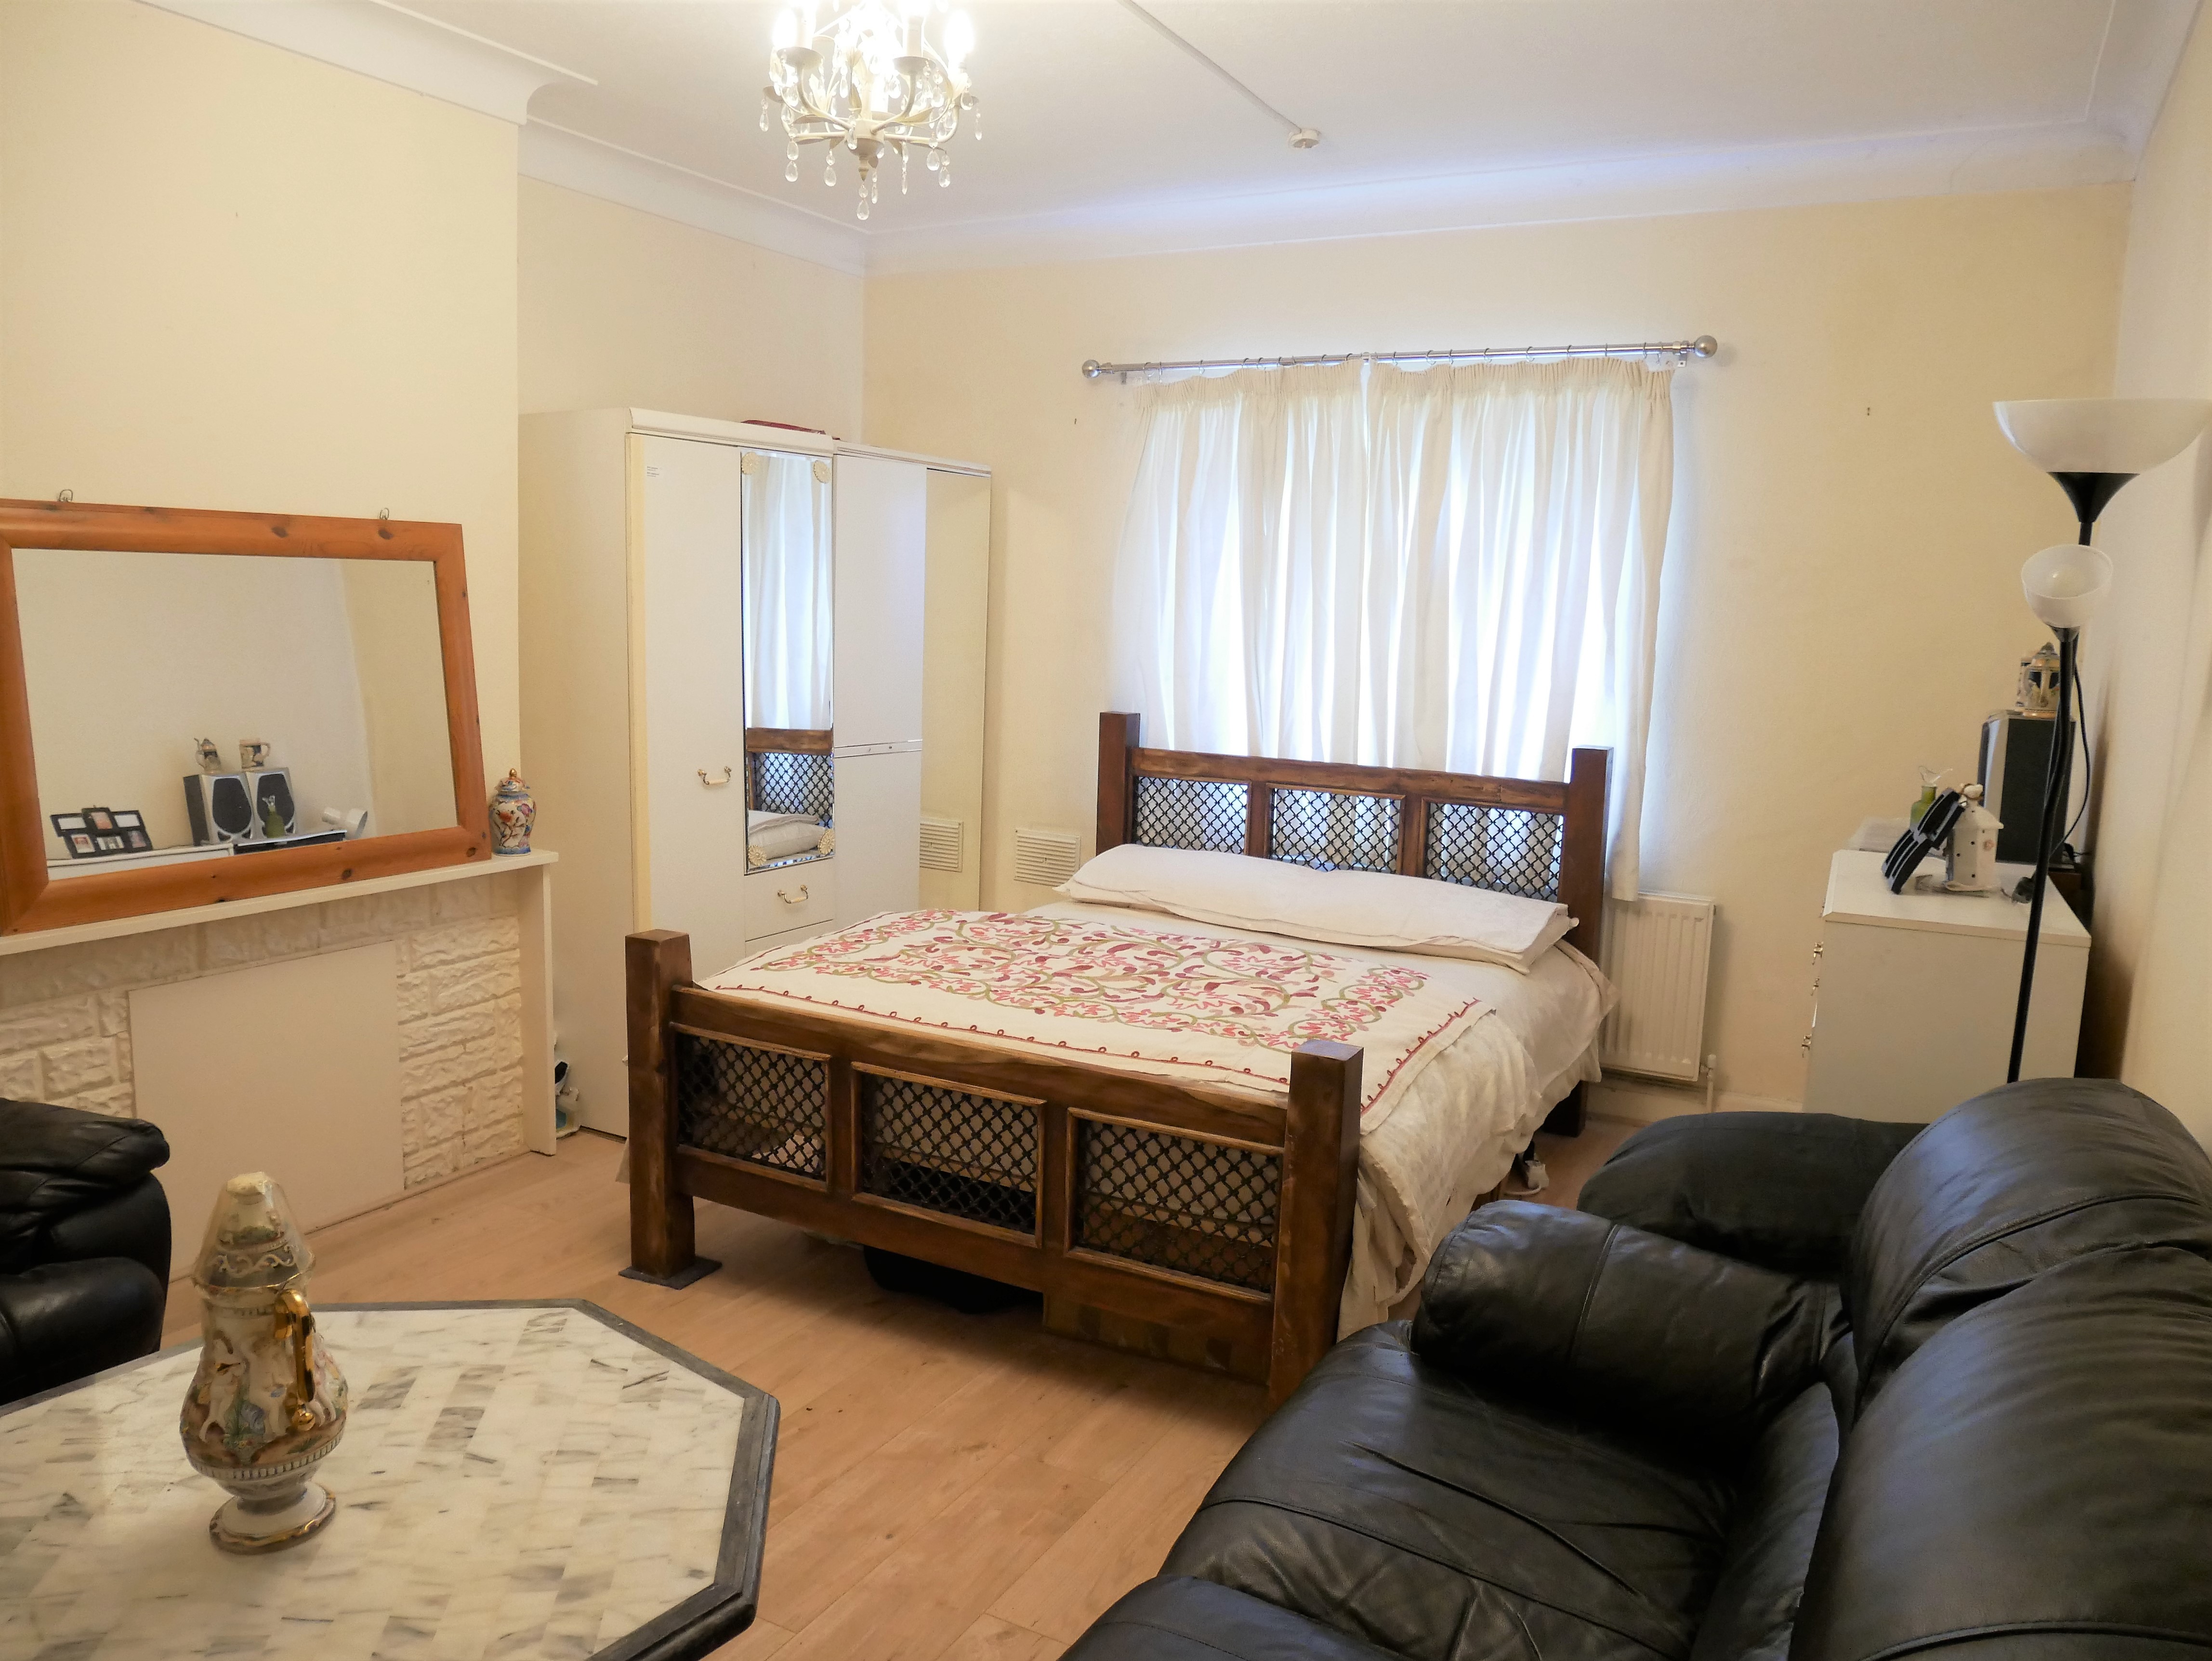 Double room in a flat share, moments away from Osterley Tube Station